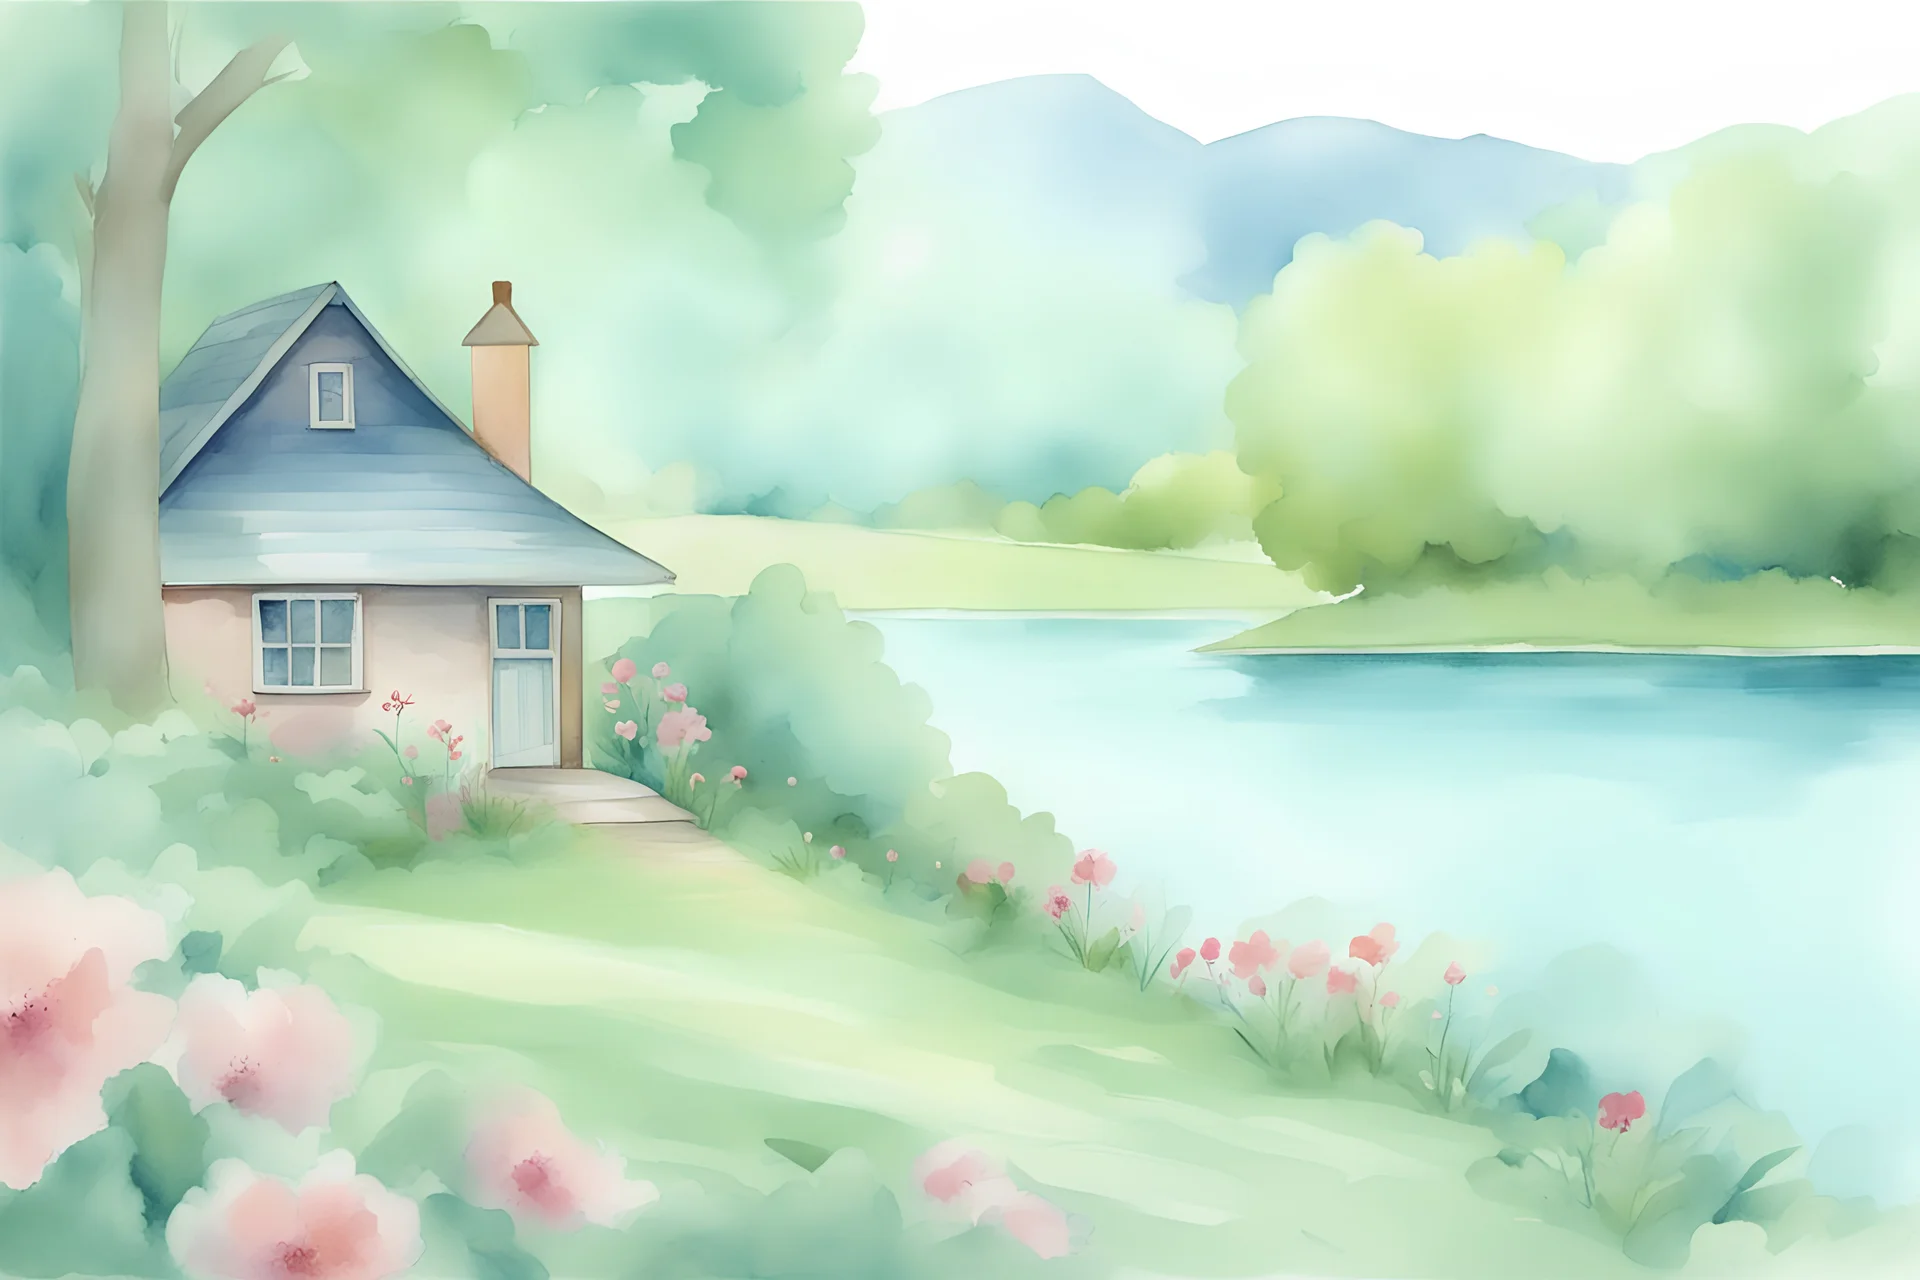 Create a illustration in a watercolor style of a simple cottage uphill by a tranquil lake with trees and flowers that create a calm and mature mood